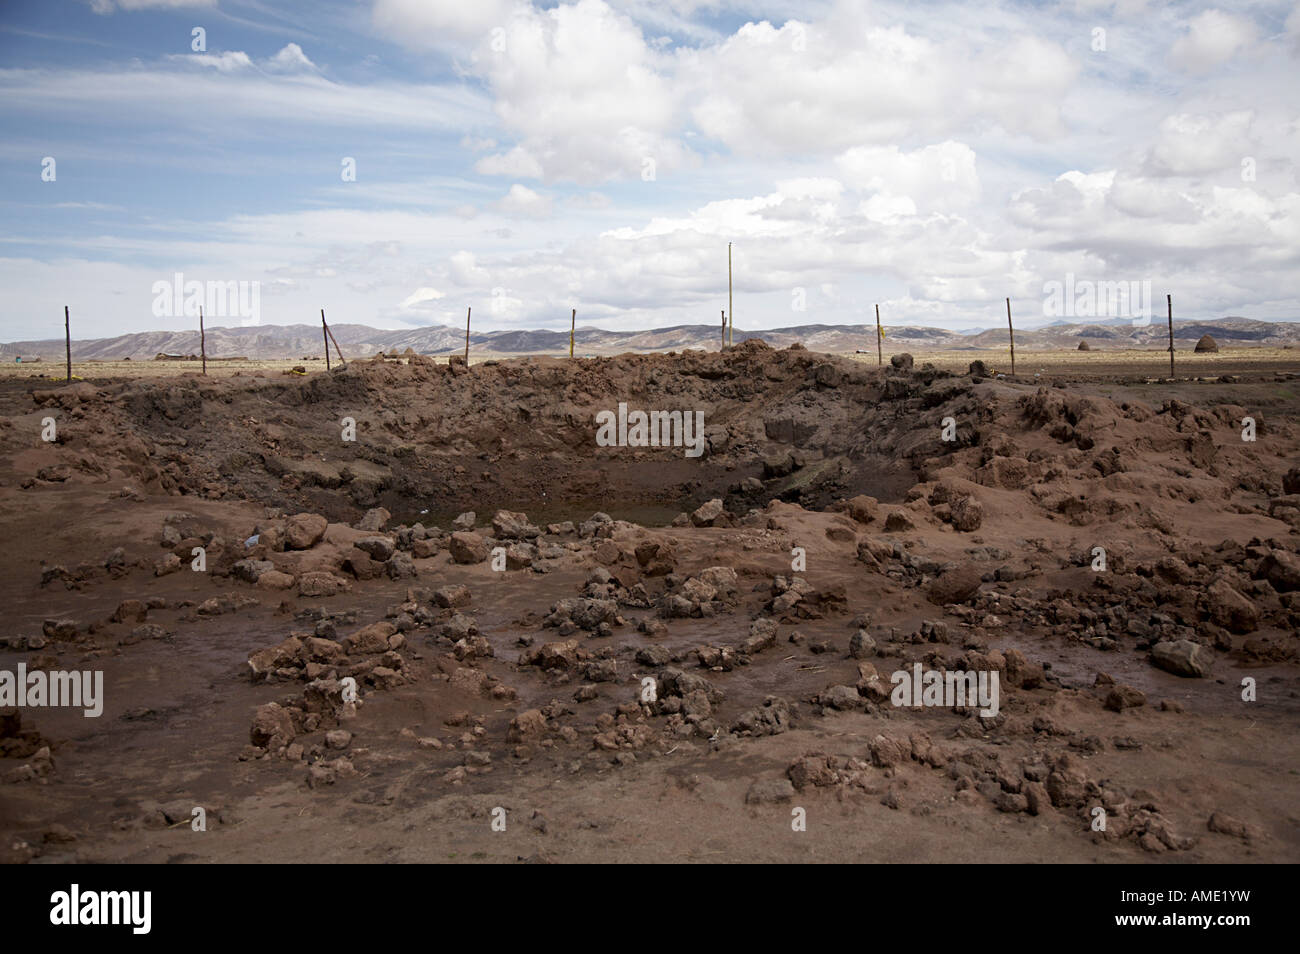 Site of meteorite crash that occurred Sept 15 2007 near the small rural village of Carancas in the Peruvian altiplano. Stock Photo